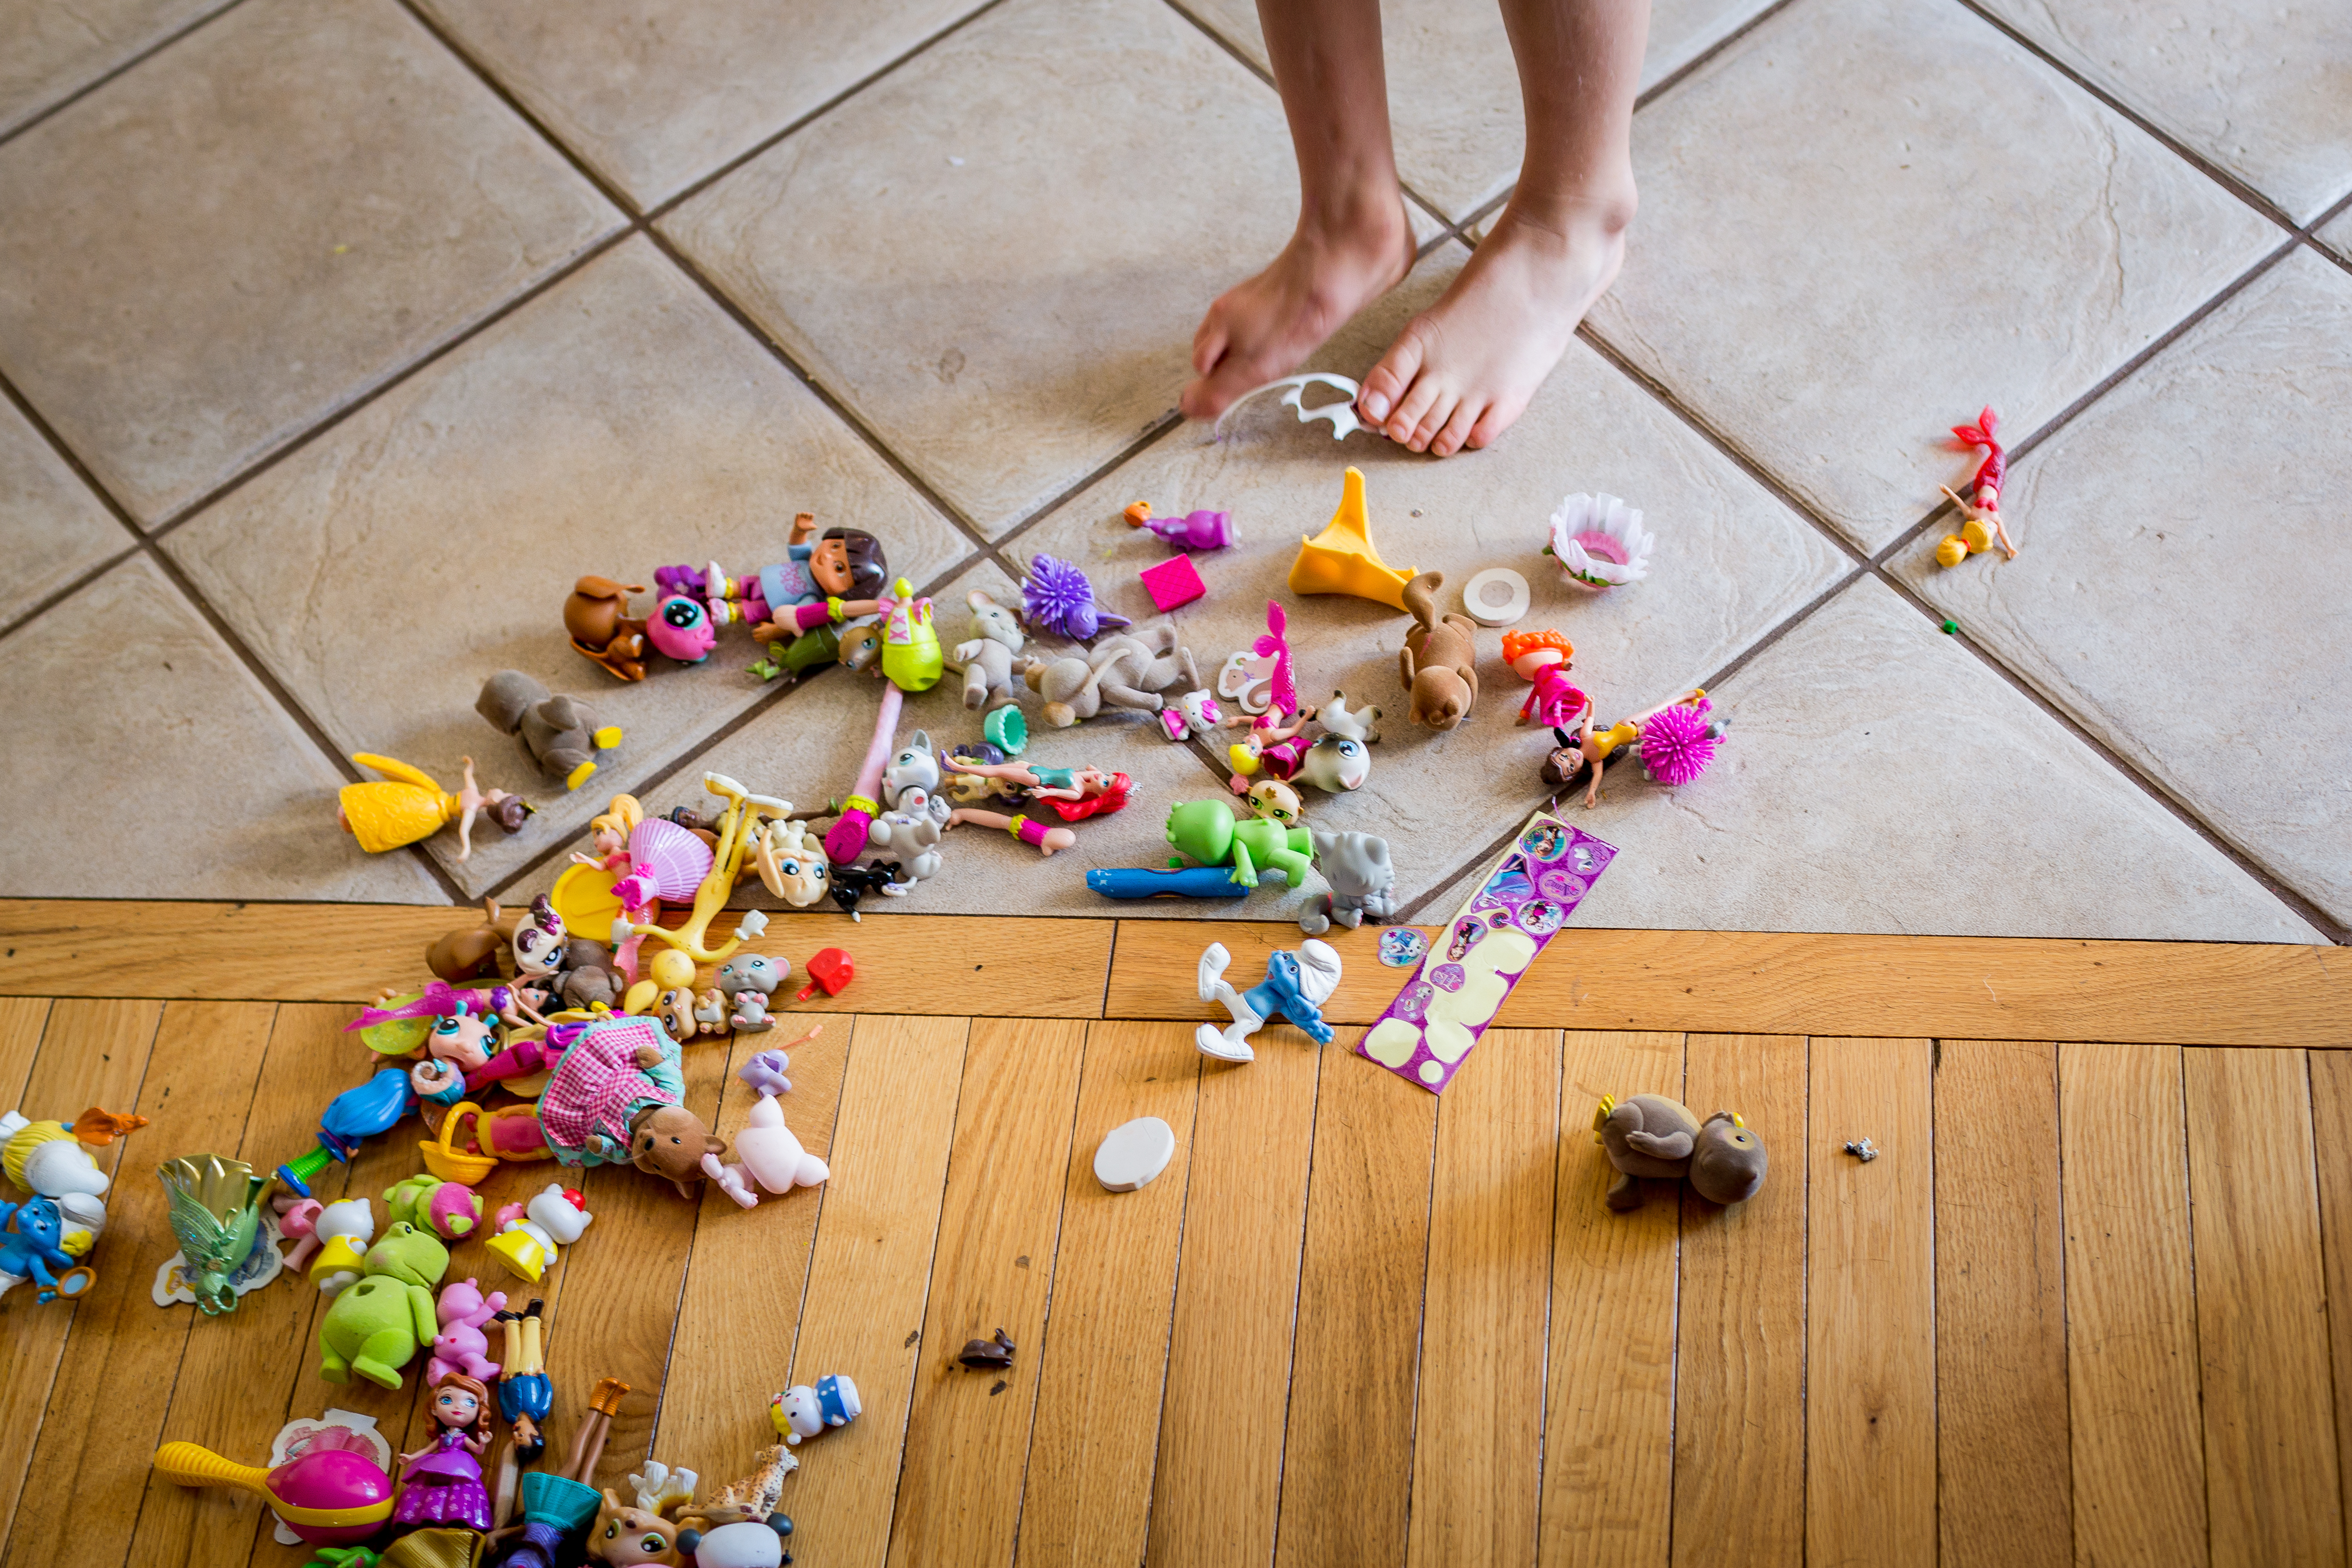 child's feet standing next to a pile of toys